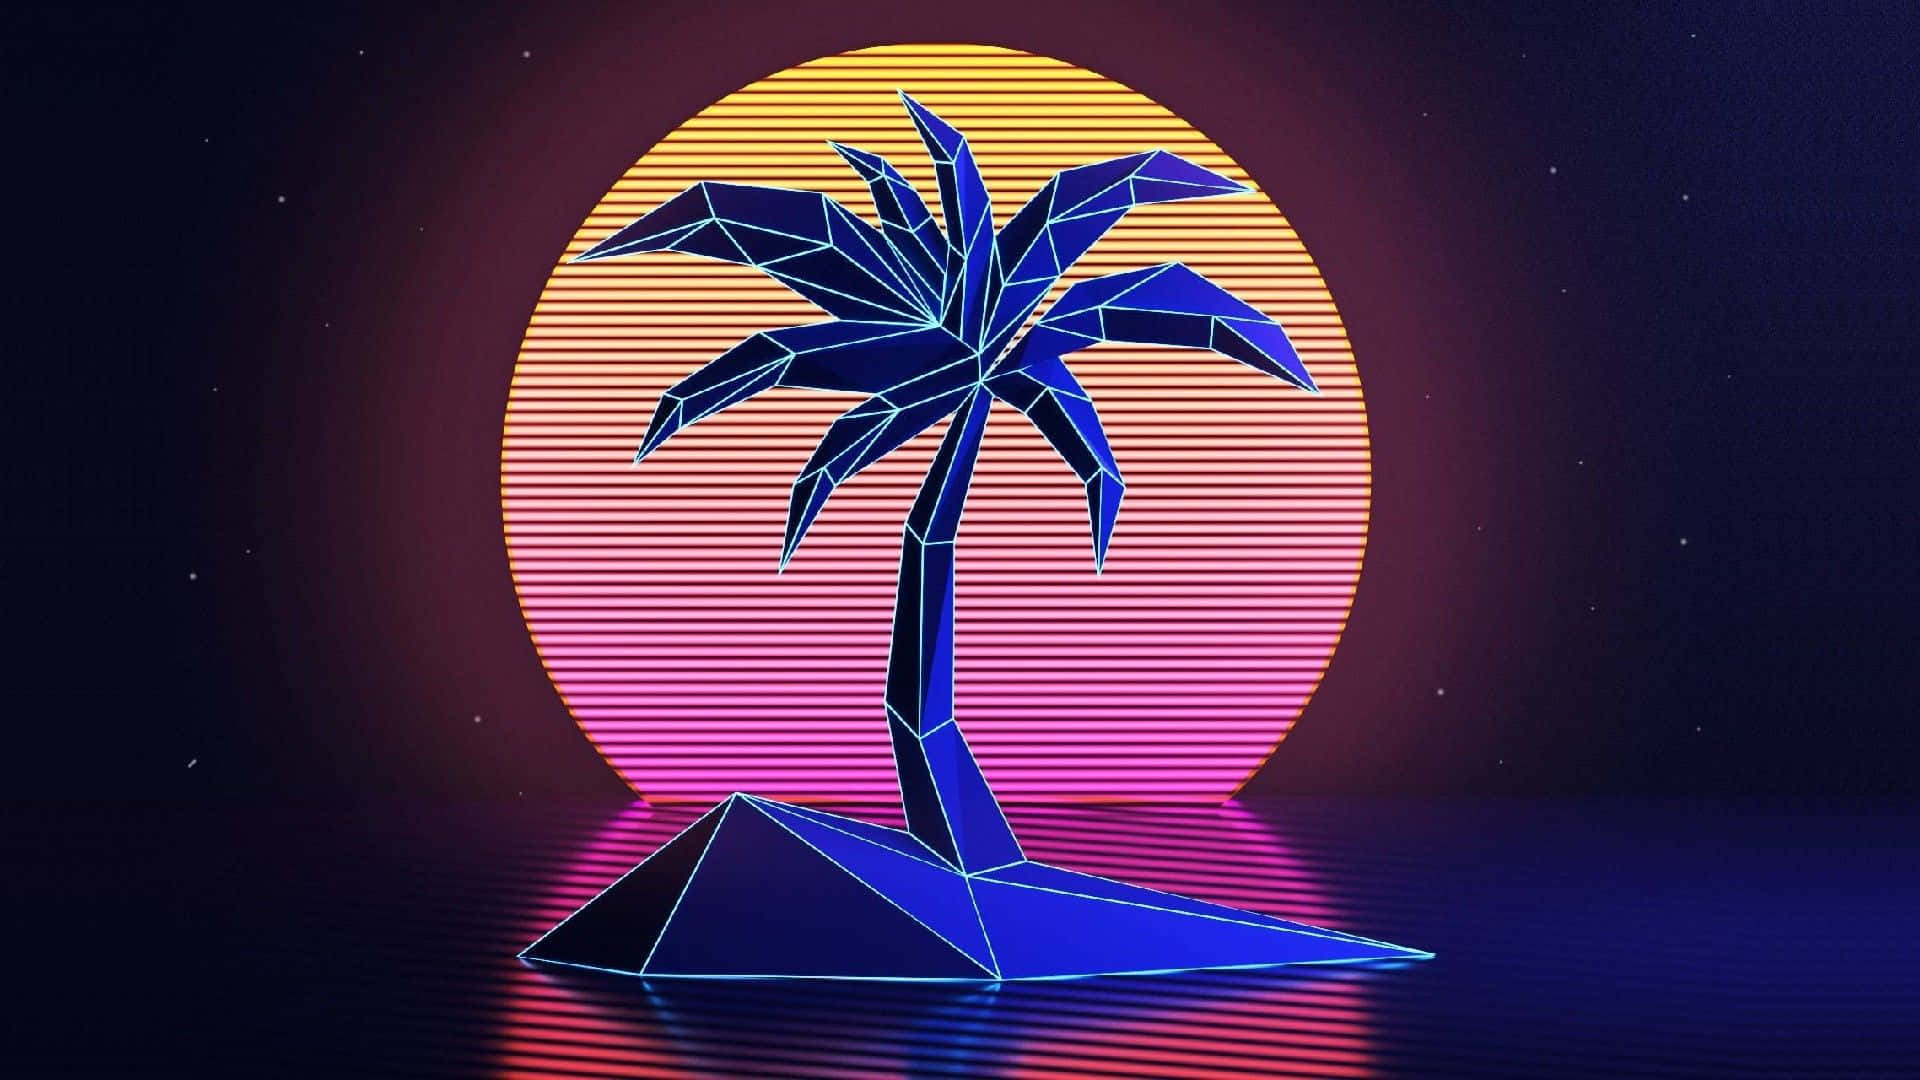 Own a piece of the past and experience the vibe of the nostalgic 80s vaporwave. Wallpaper